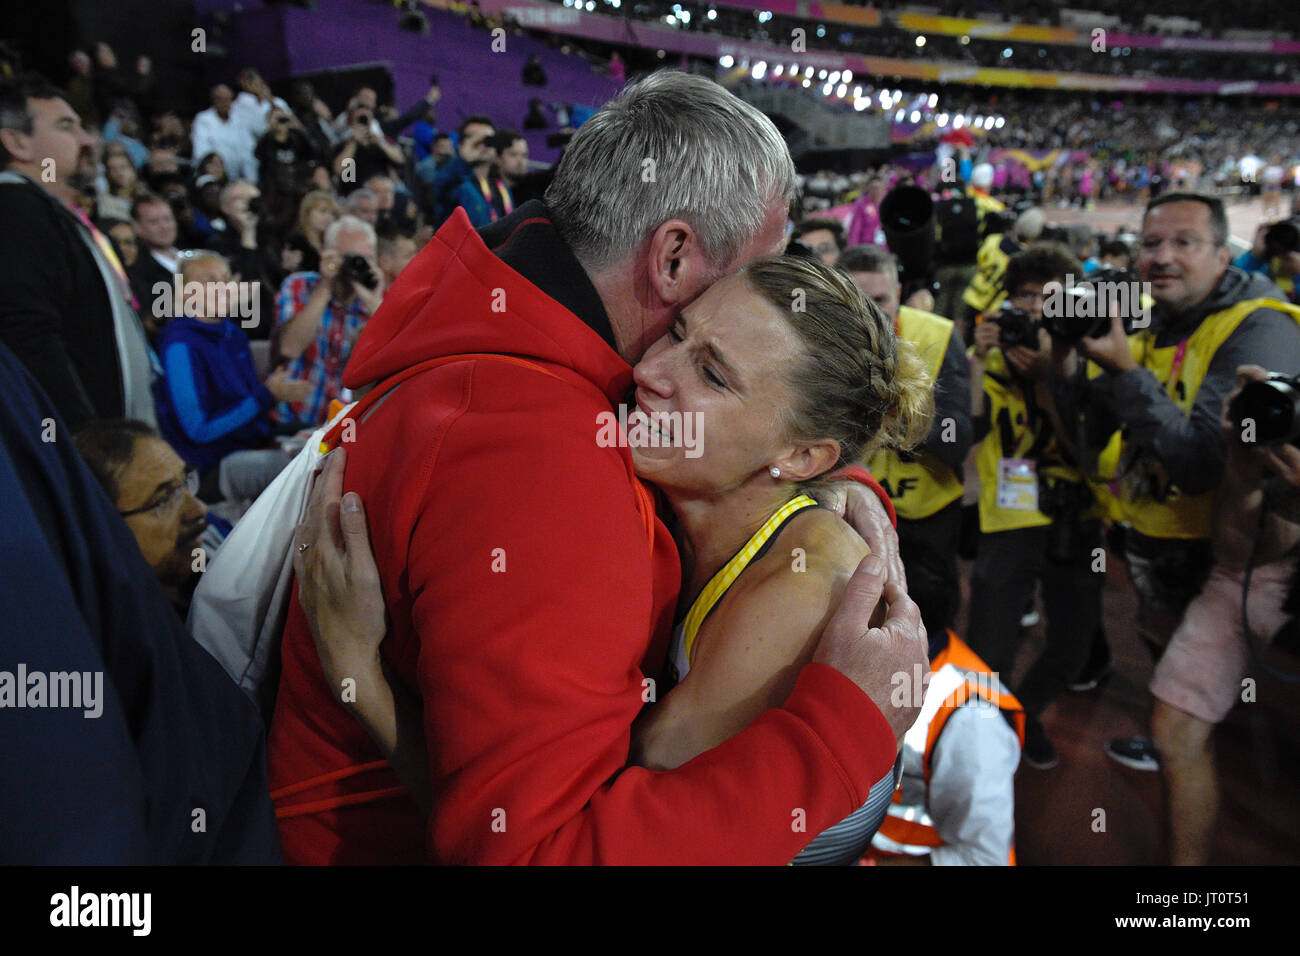 London, UK. 6th Aug, 2017. Carolin Schaefer of Germany celebrates her silver medal in the overall ranking together with her coach Juergen Sammert after the women's 800 metre track of the hepathlon at the IAAF World Championships in Athletics at the Olympic Stadium in London, UK, 6 August 2017. Photo: Rainer Jensen/dpa/Alamy Live News Stock Photo